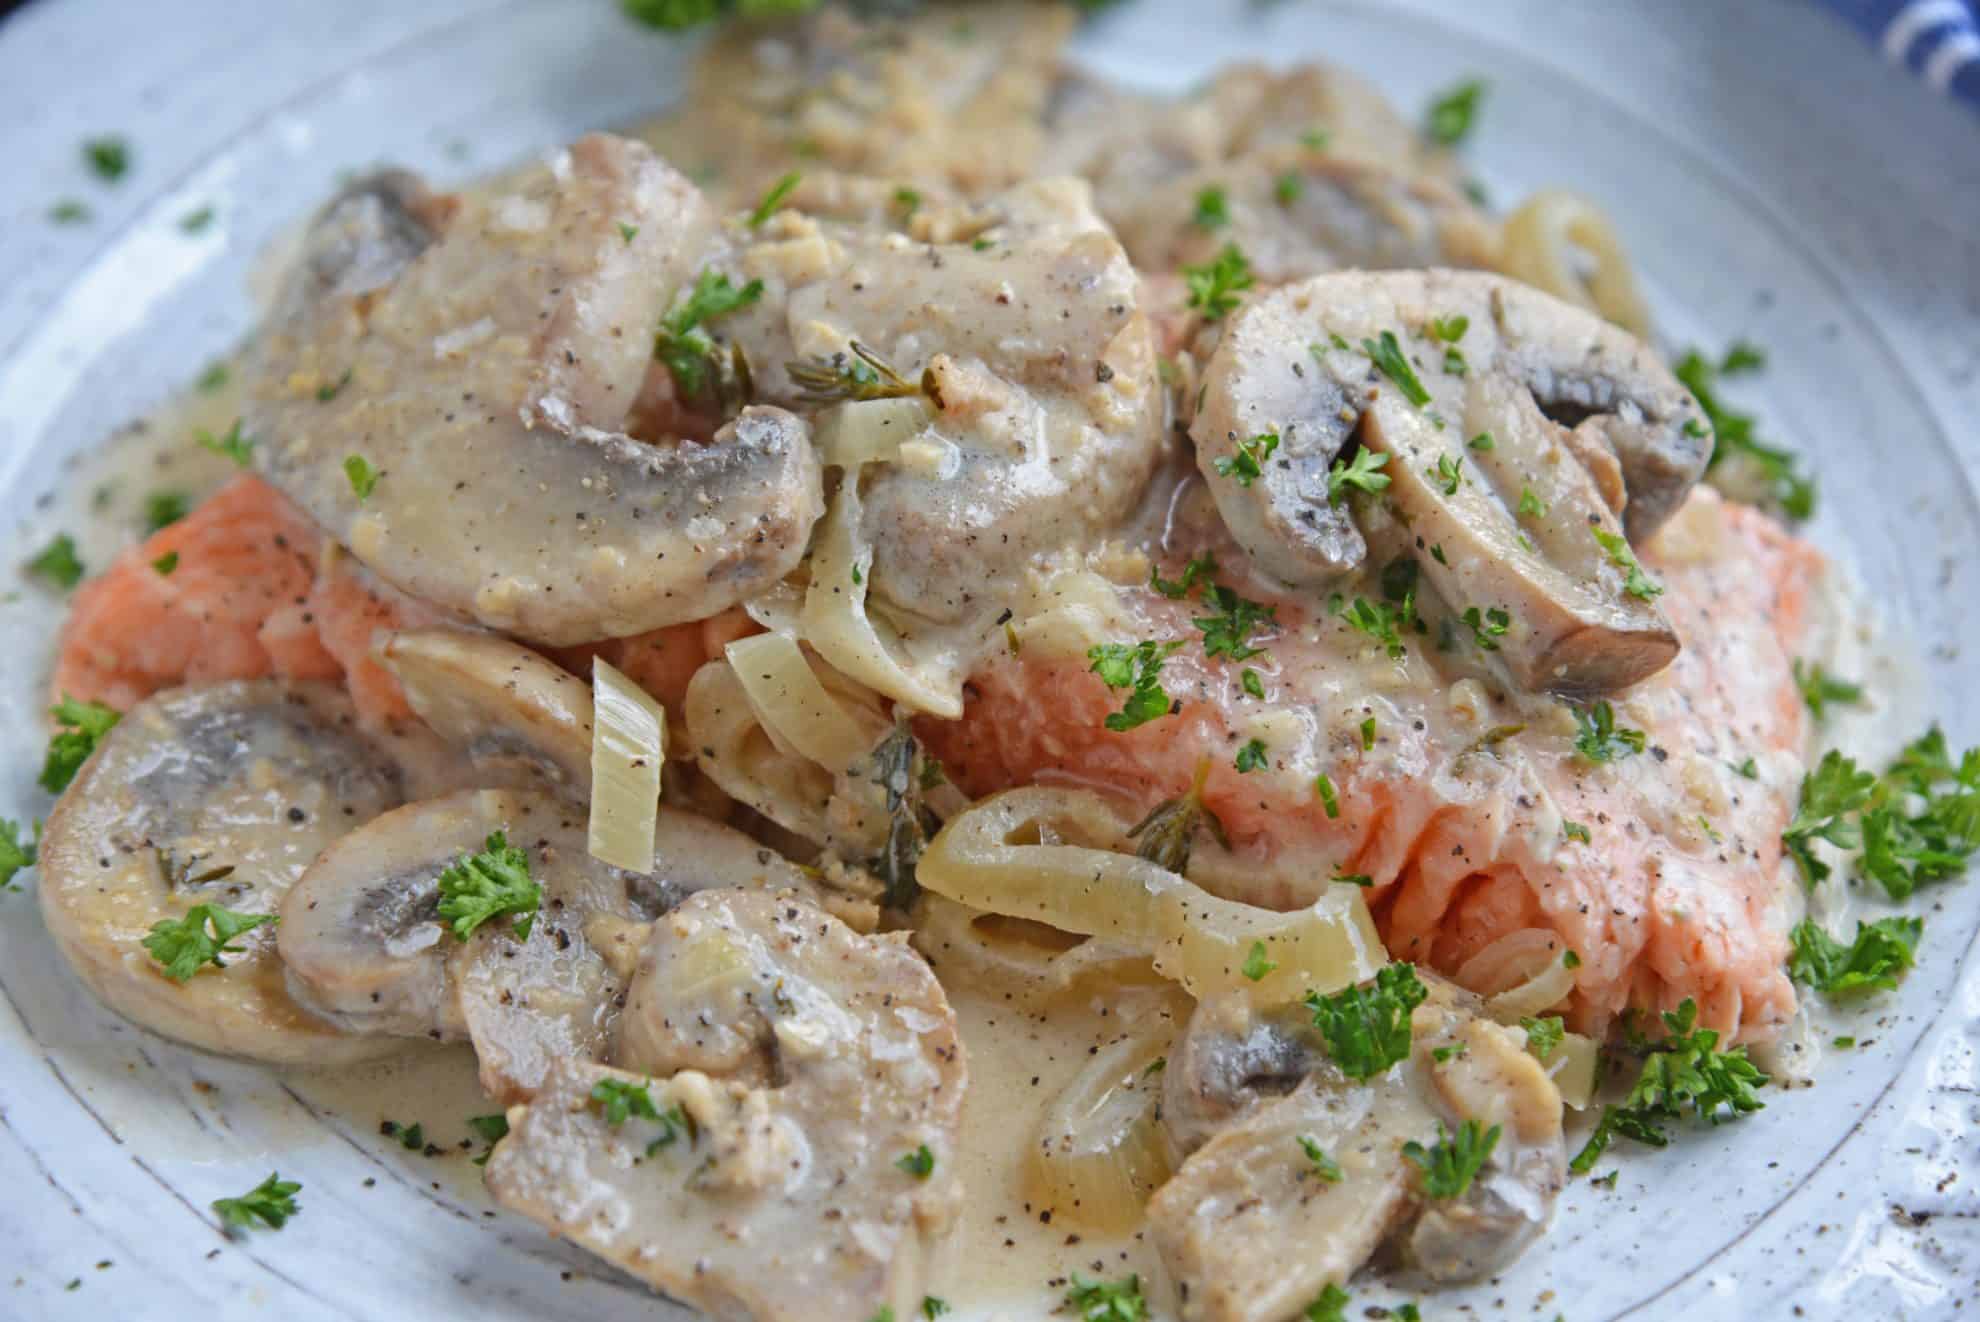 Side view of salmon in creamy sauce